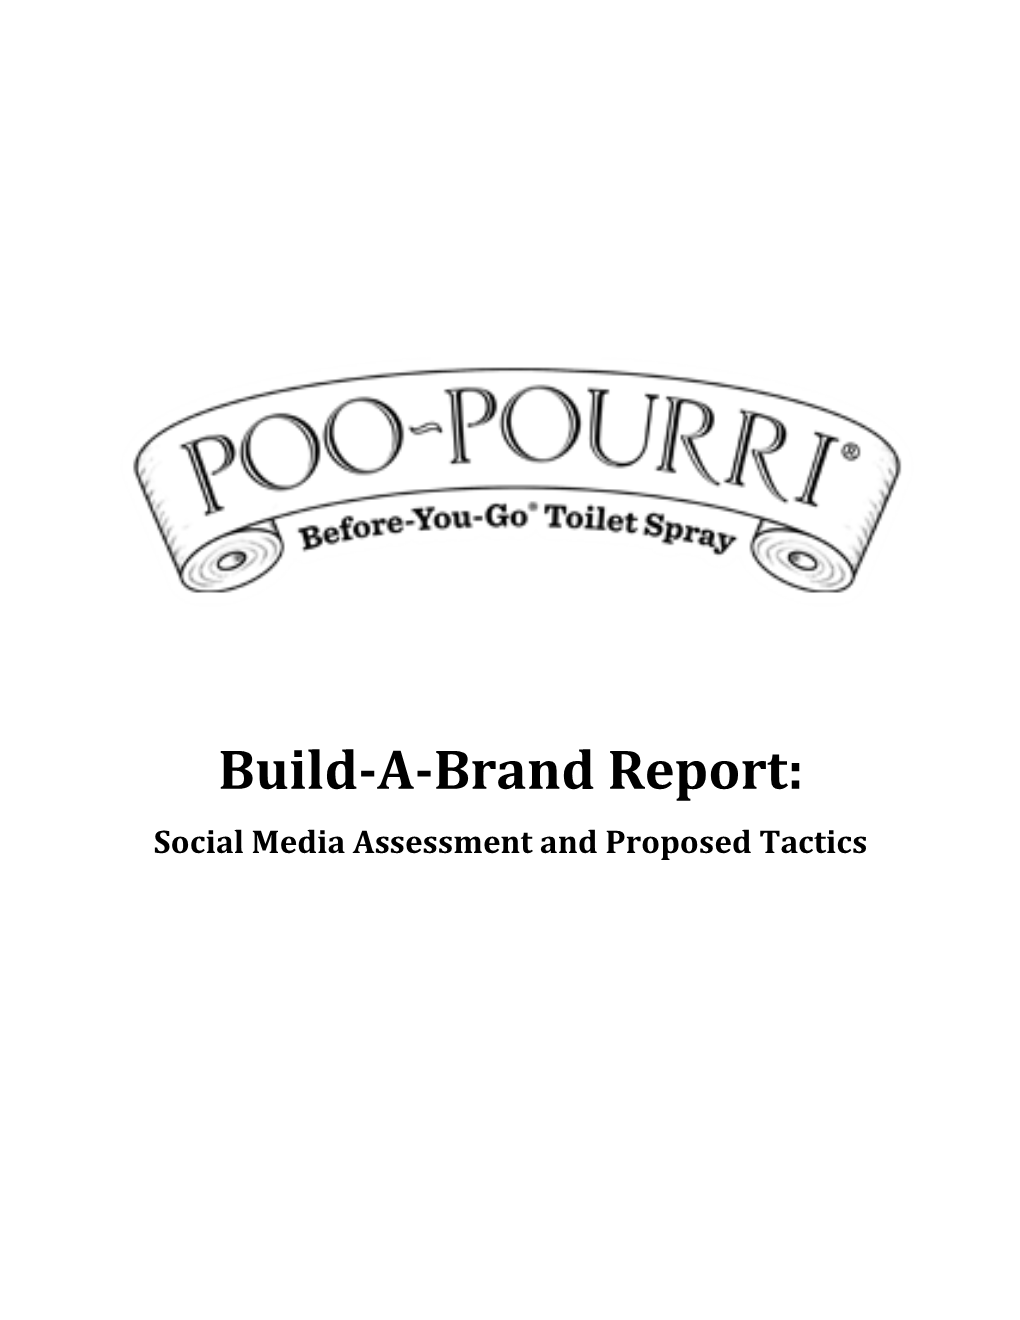 Poo-Pourri Is a Fragrance Company That Sells Scented and Odour-Trapping, “Before-You-Go” Toilet Sprays